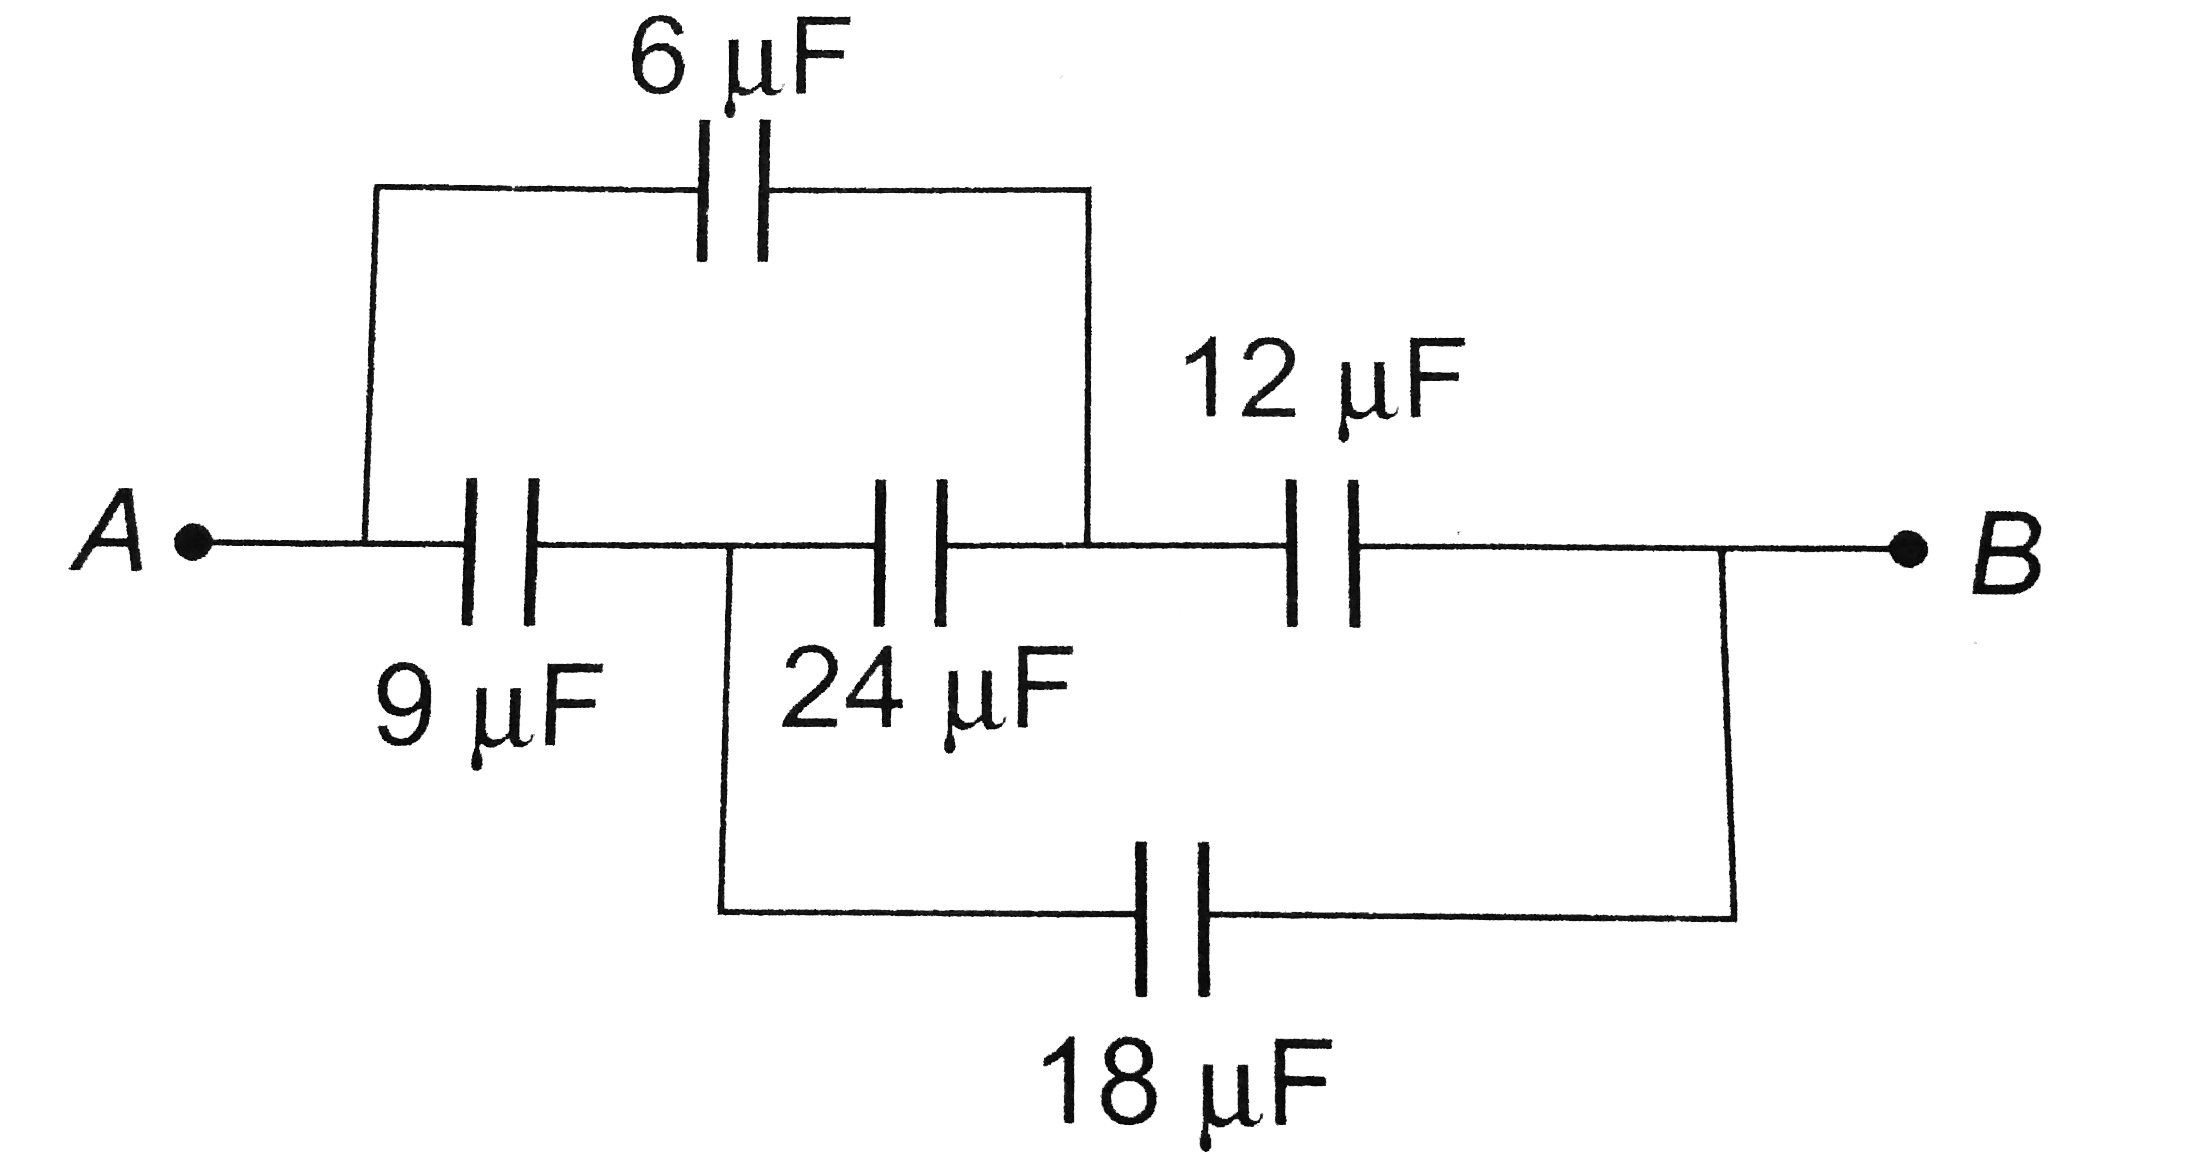 In the connection shown in the adjoining figure, the equivalent capacity between A and B will be